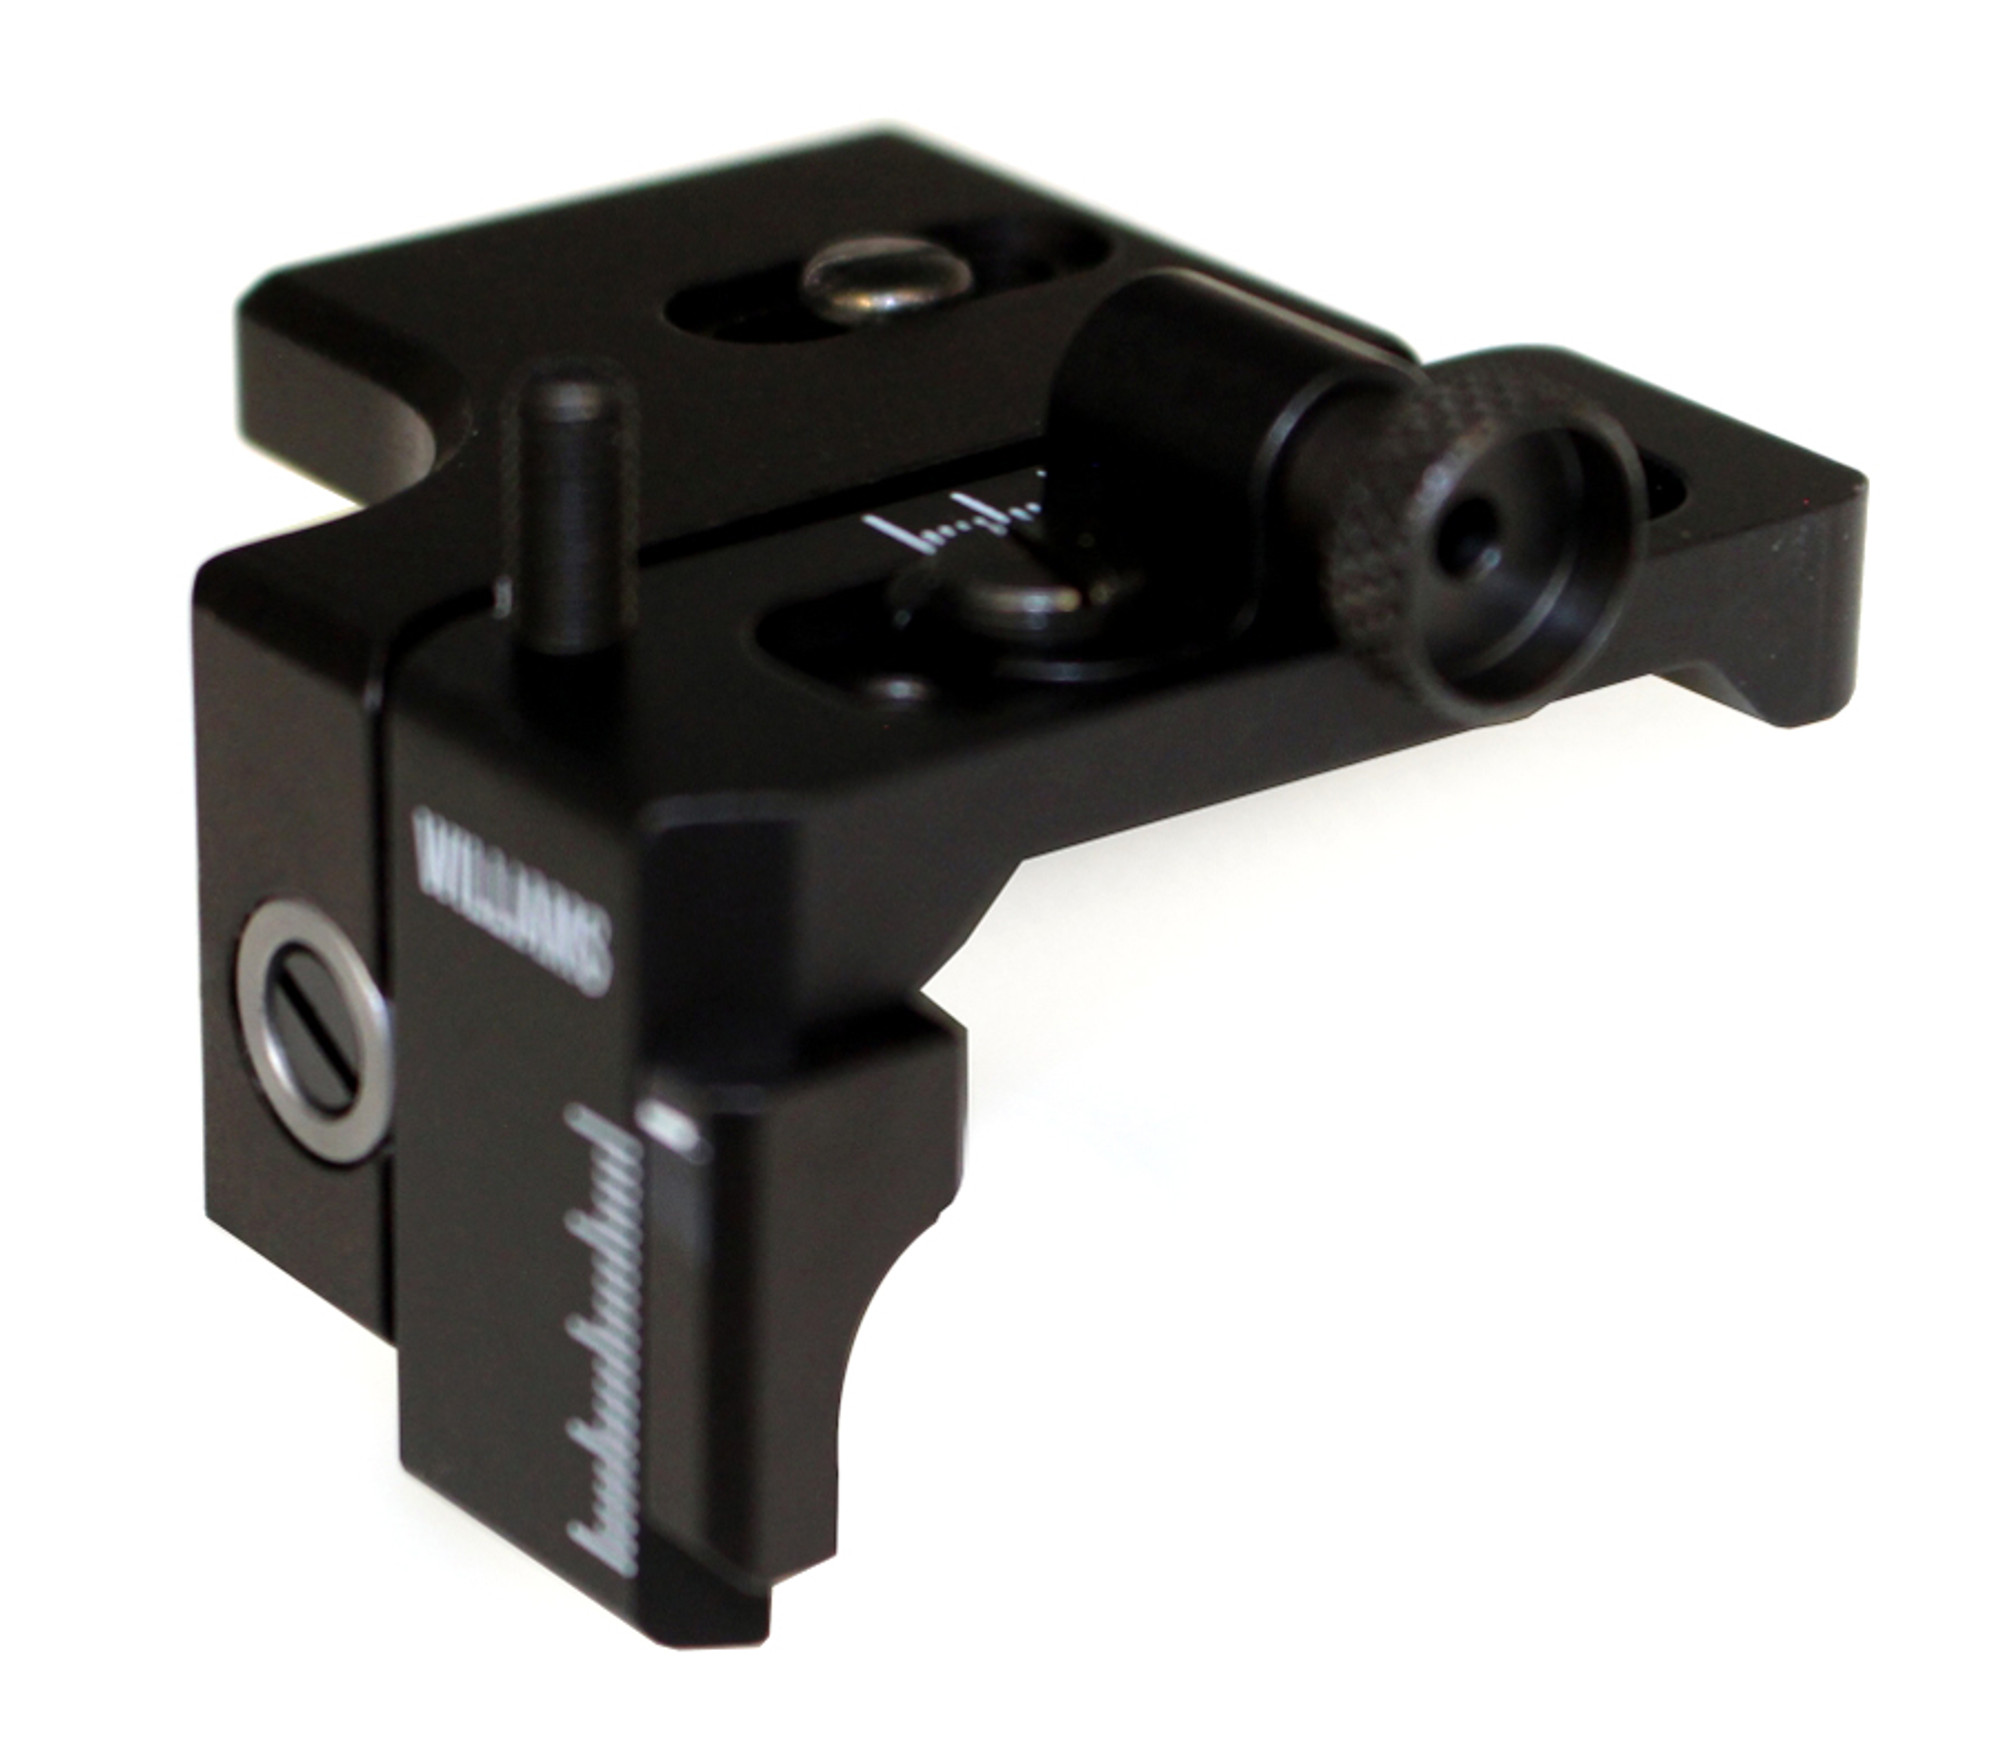 5D GR Dovetail Low Line Of Sight Receiver Sight